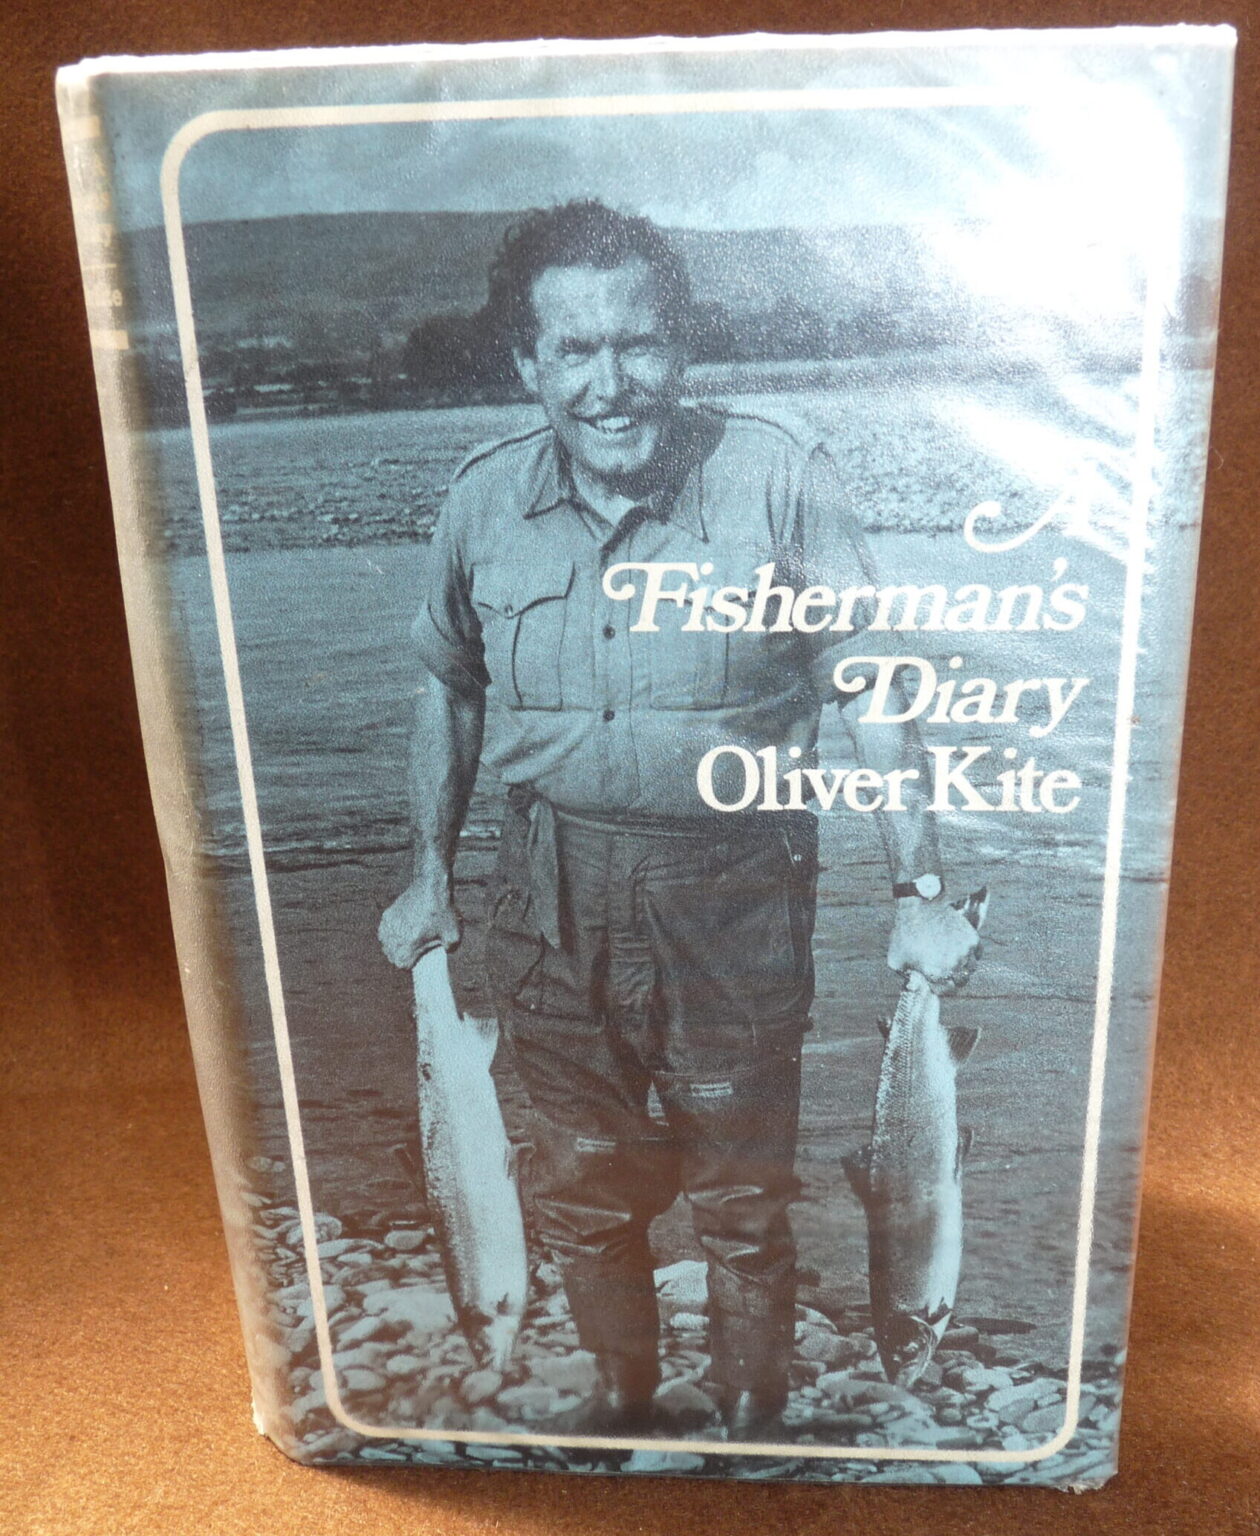 A Fisherman's Diary, Oliver Kite, 1969 1st edition fishing book